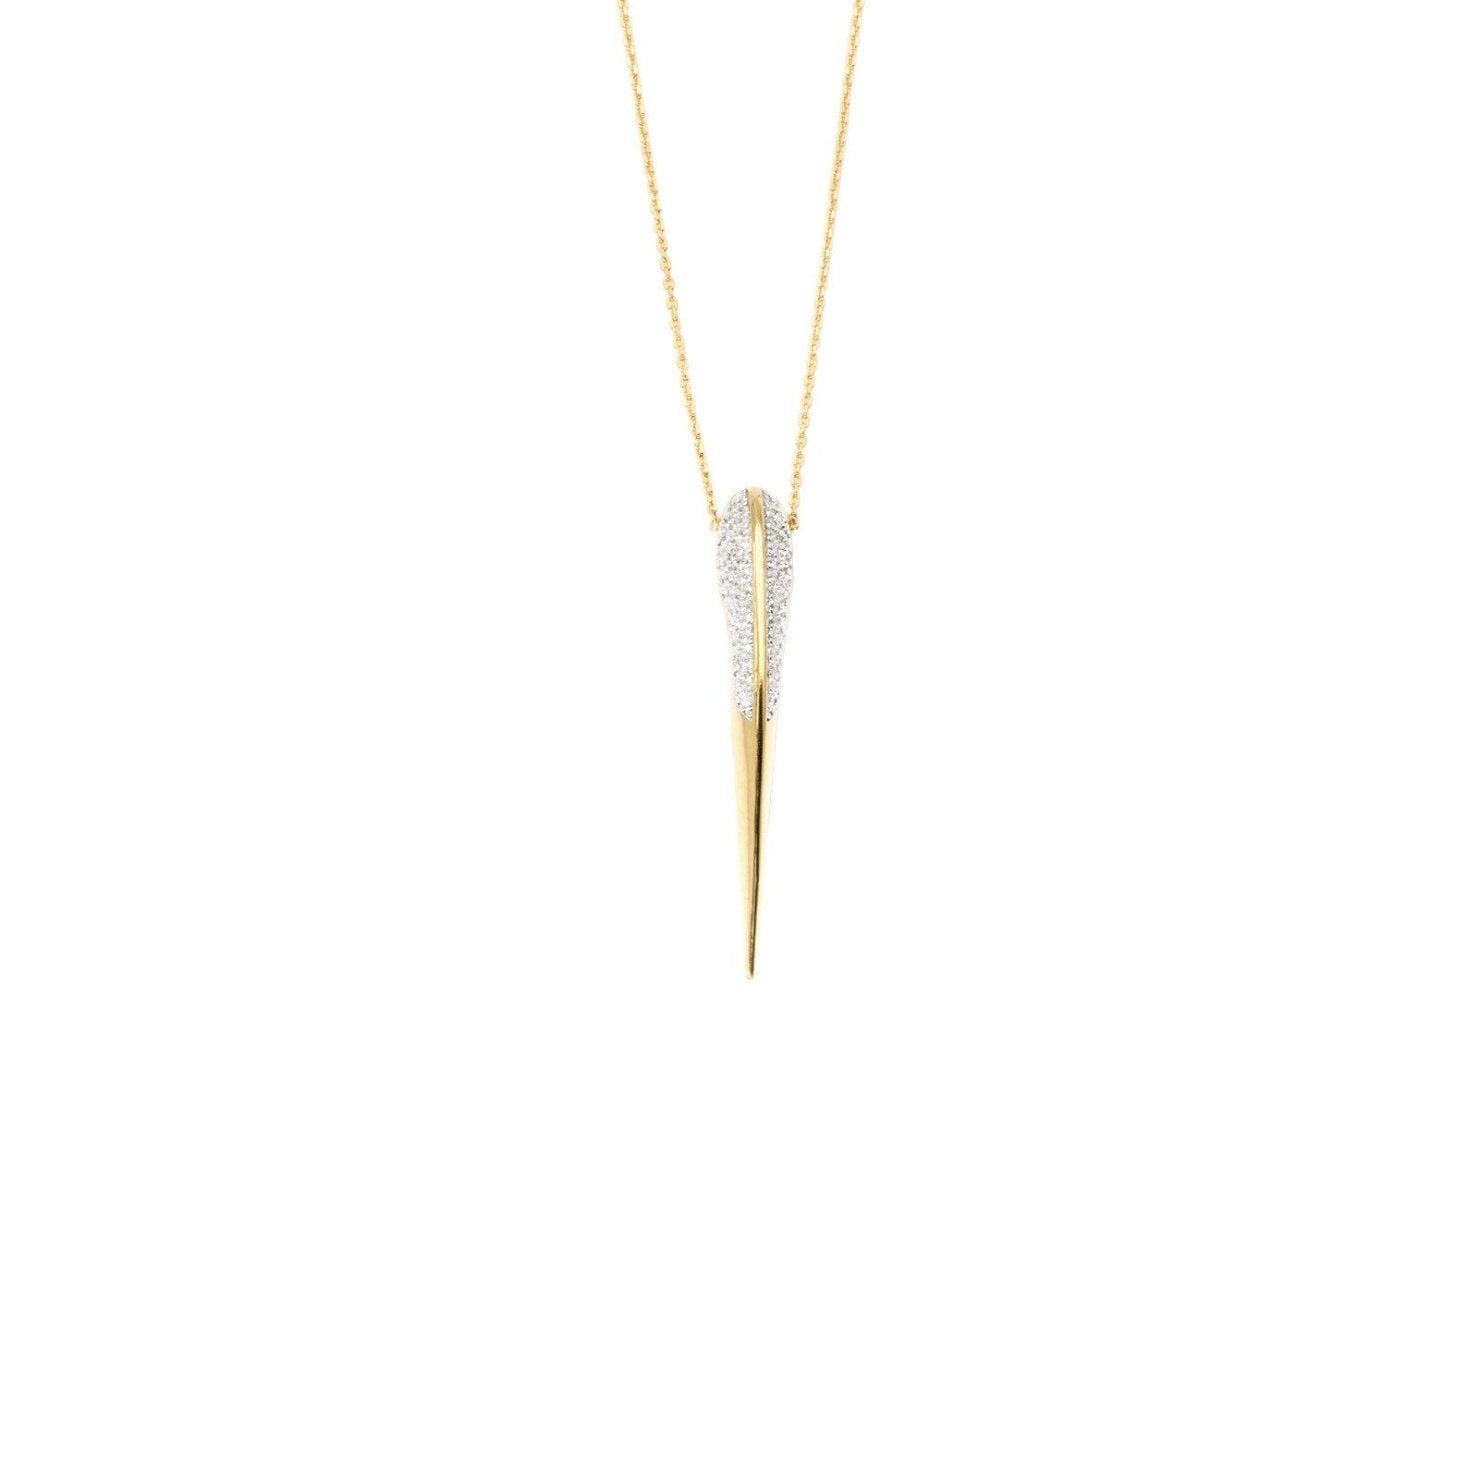 Bird beak gold necklace with cz stones on white background - Camille Jewelry